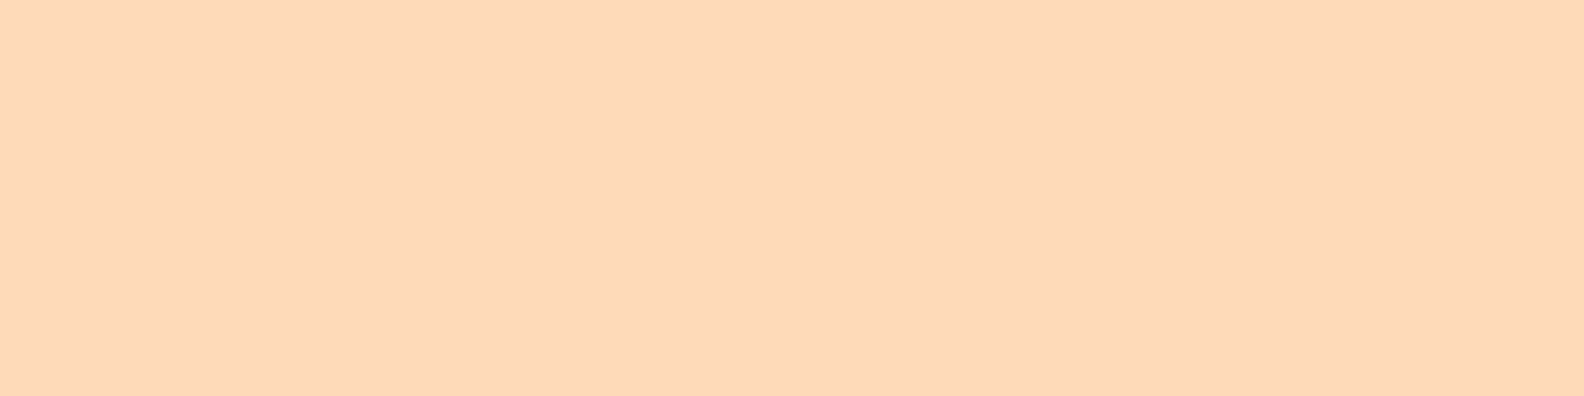 1584x396 Peach Puff Solid Color Background